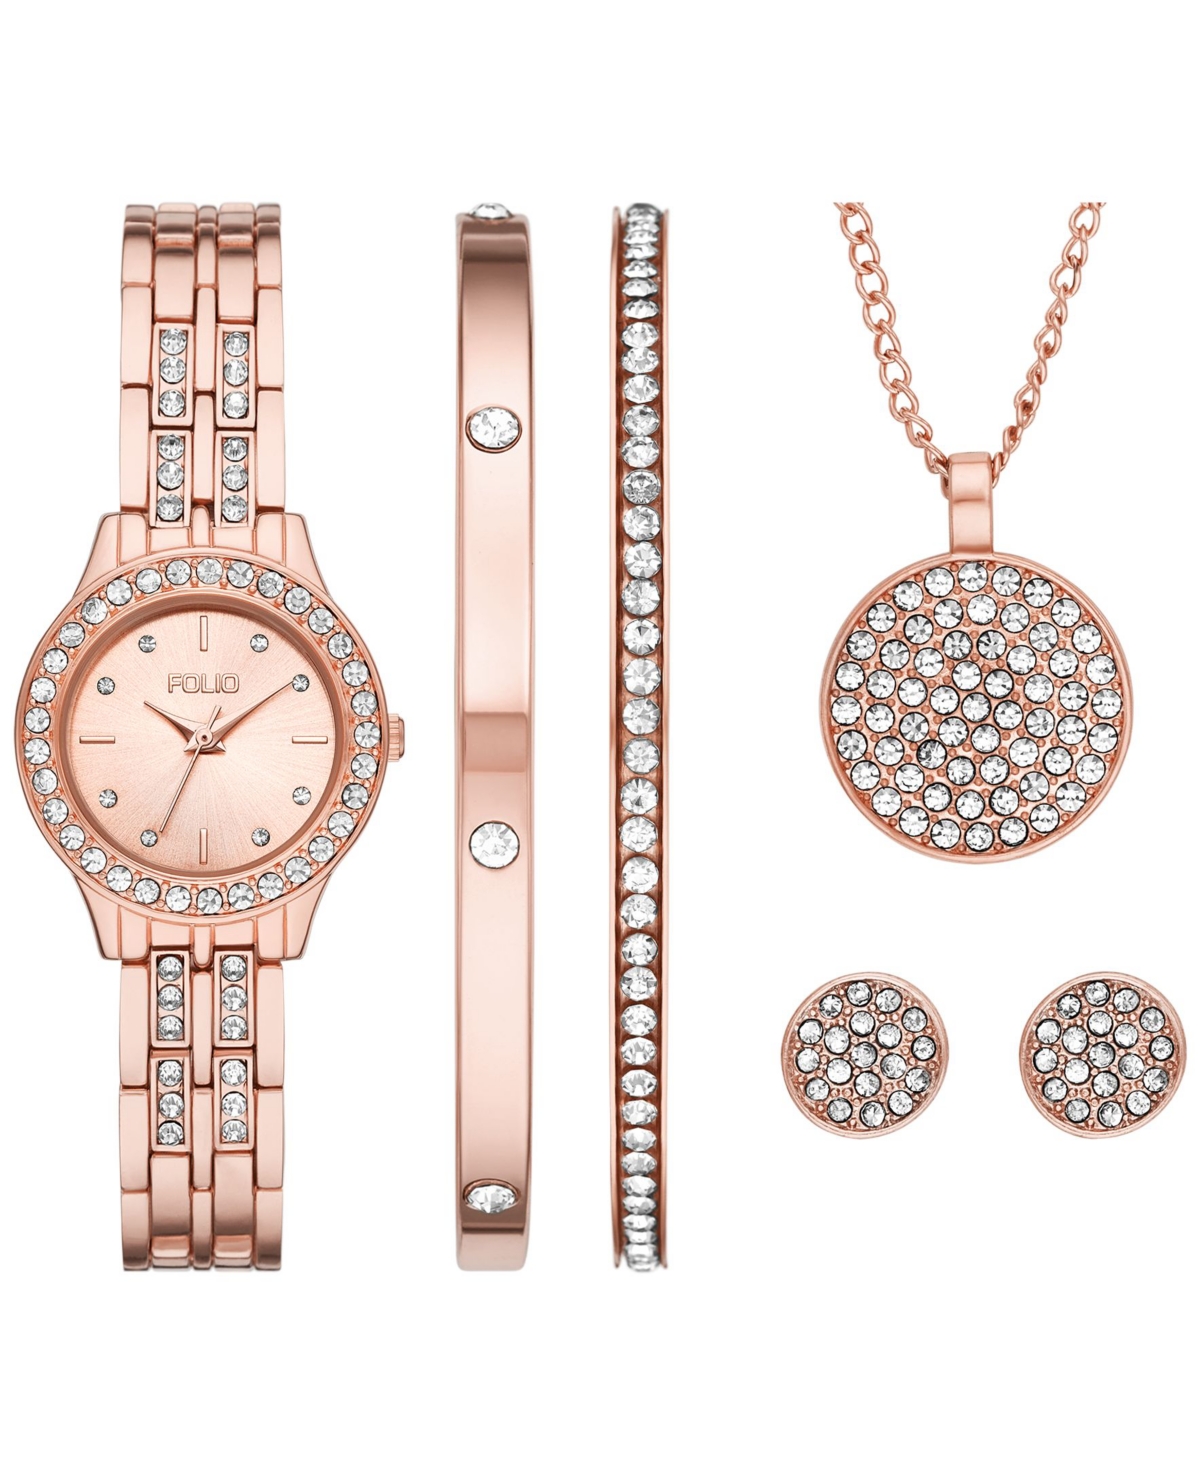 Women's Three Hand Rose Gold-Tone Alloy Watch 27mm Gift Set - Rose Gold-Tone